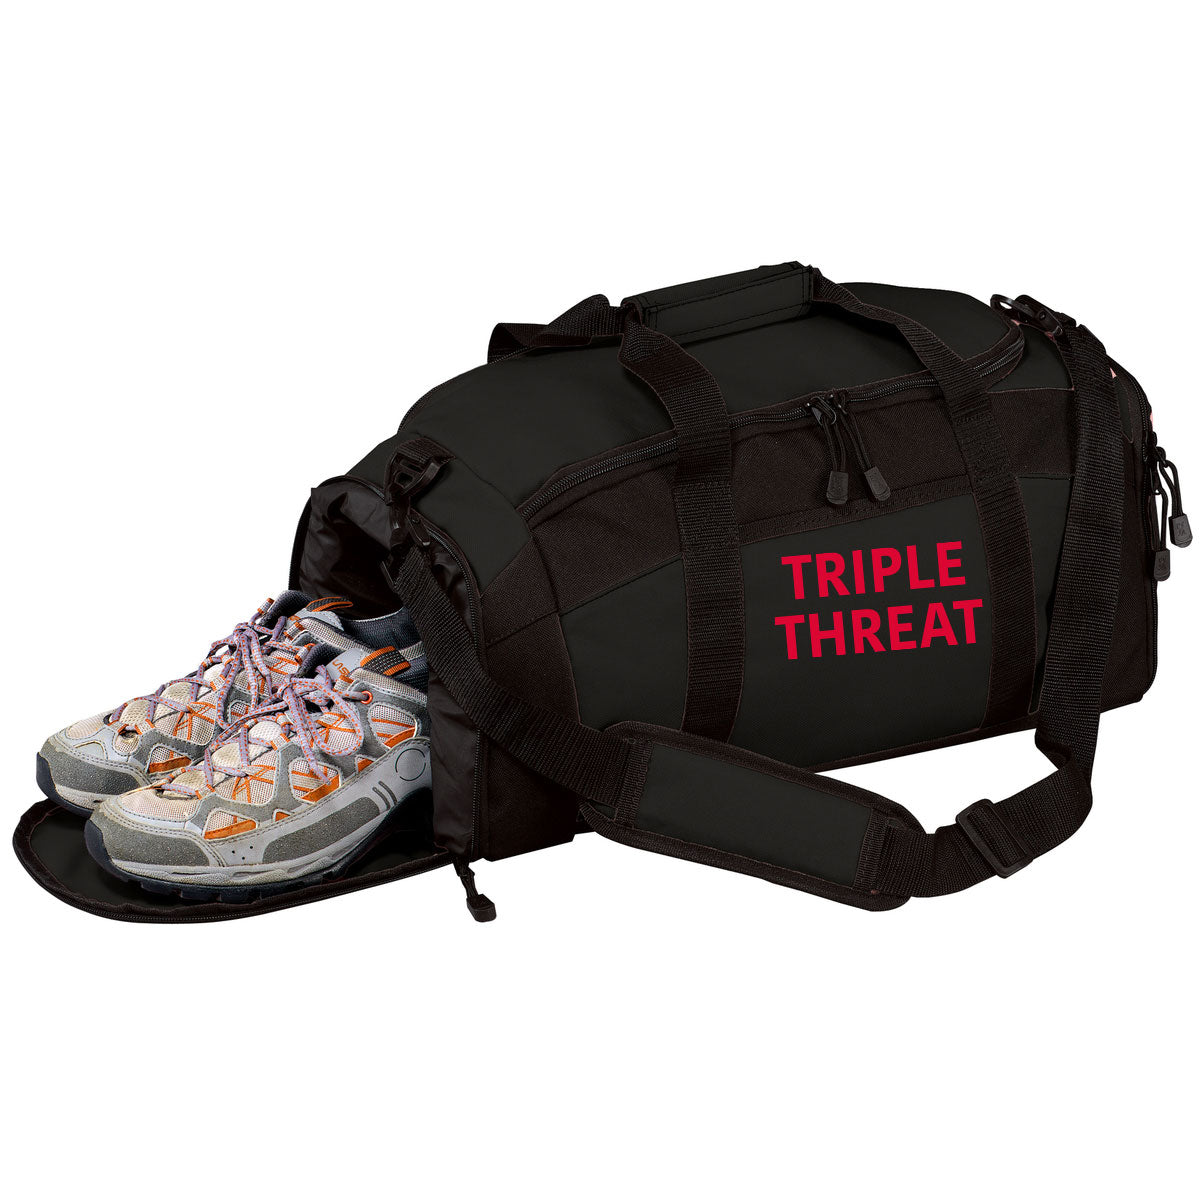 TRIPLE THREAT EMBROIDERED PLAYER DUFFLE BAG